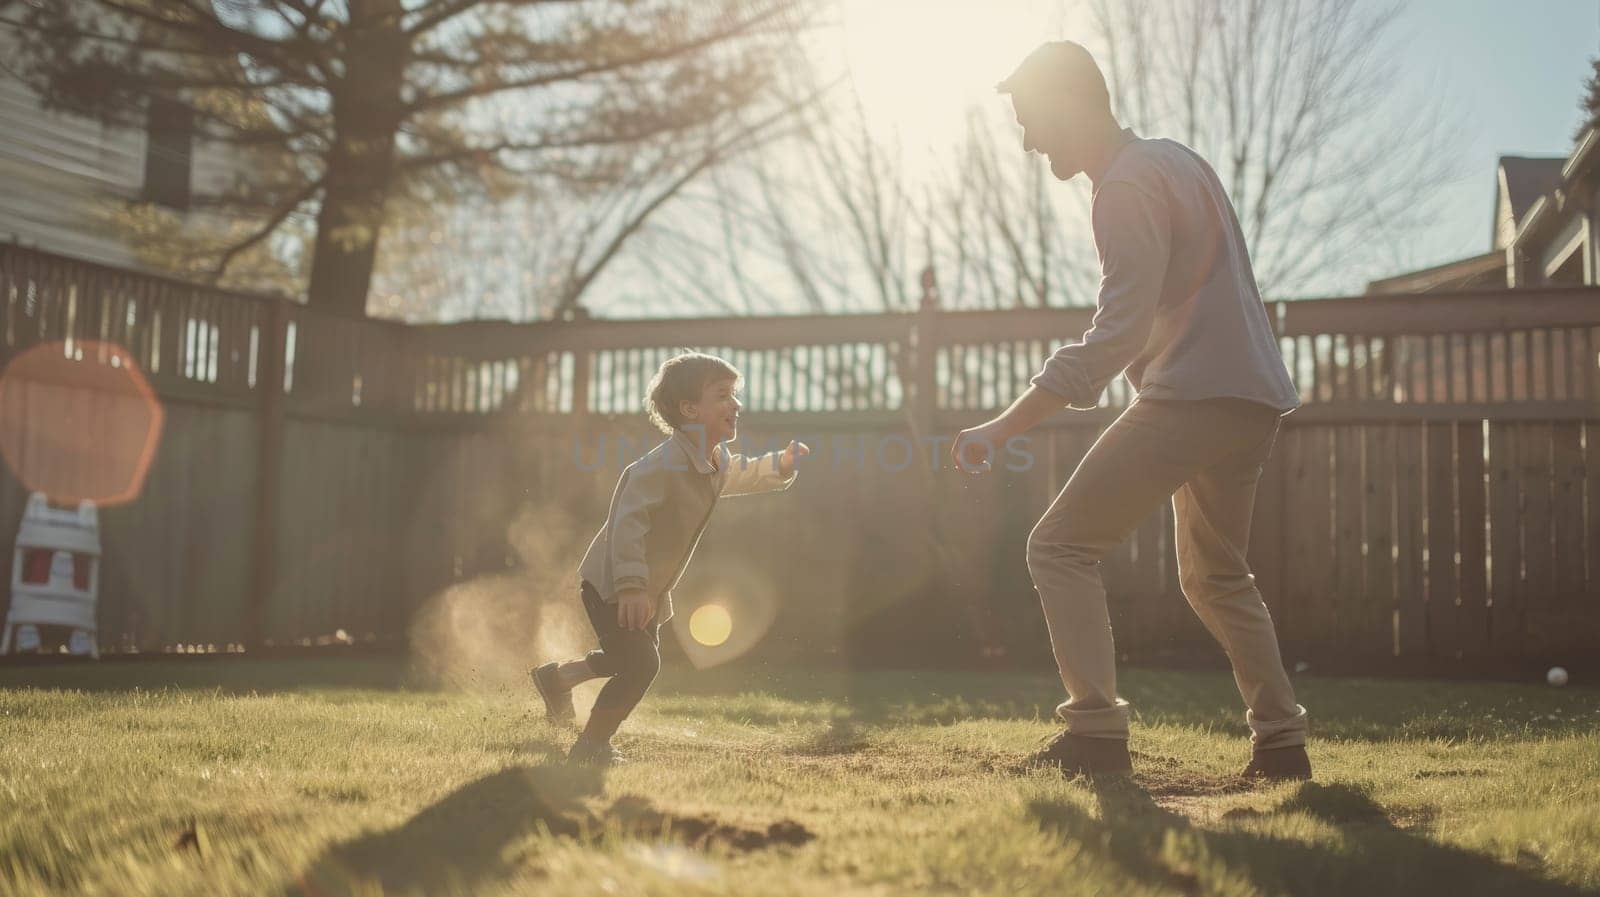 Father and son playing catch with a baseball in backyard at sunset. by sfinks